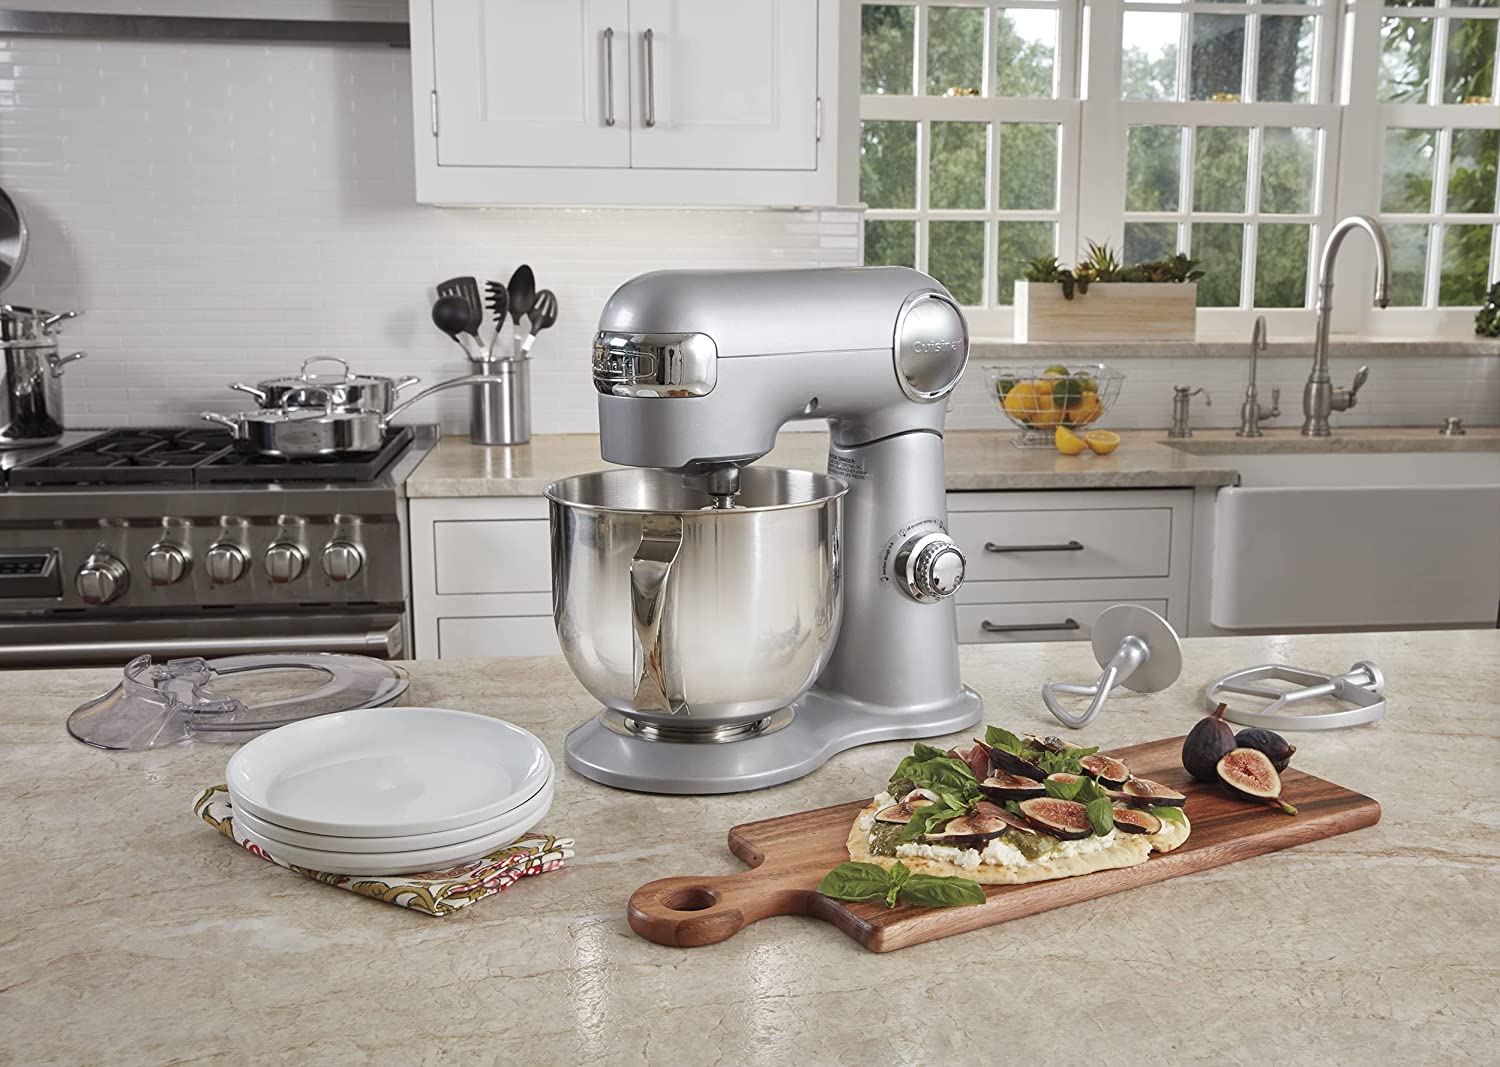 Cuisinart vs. KitchenAid Stand Mixers (12 Key Differences) - Prudent Reviews